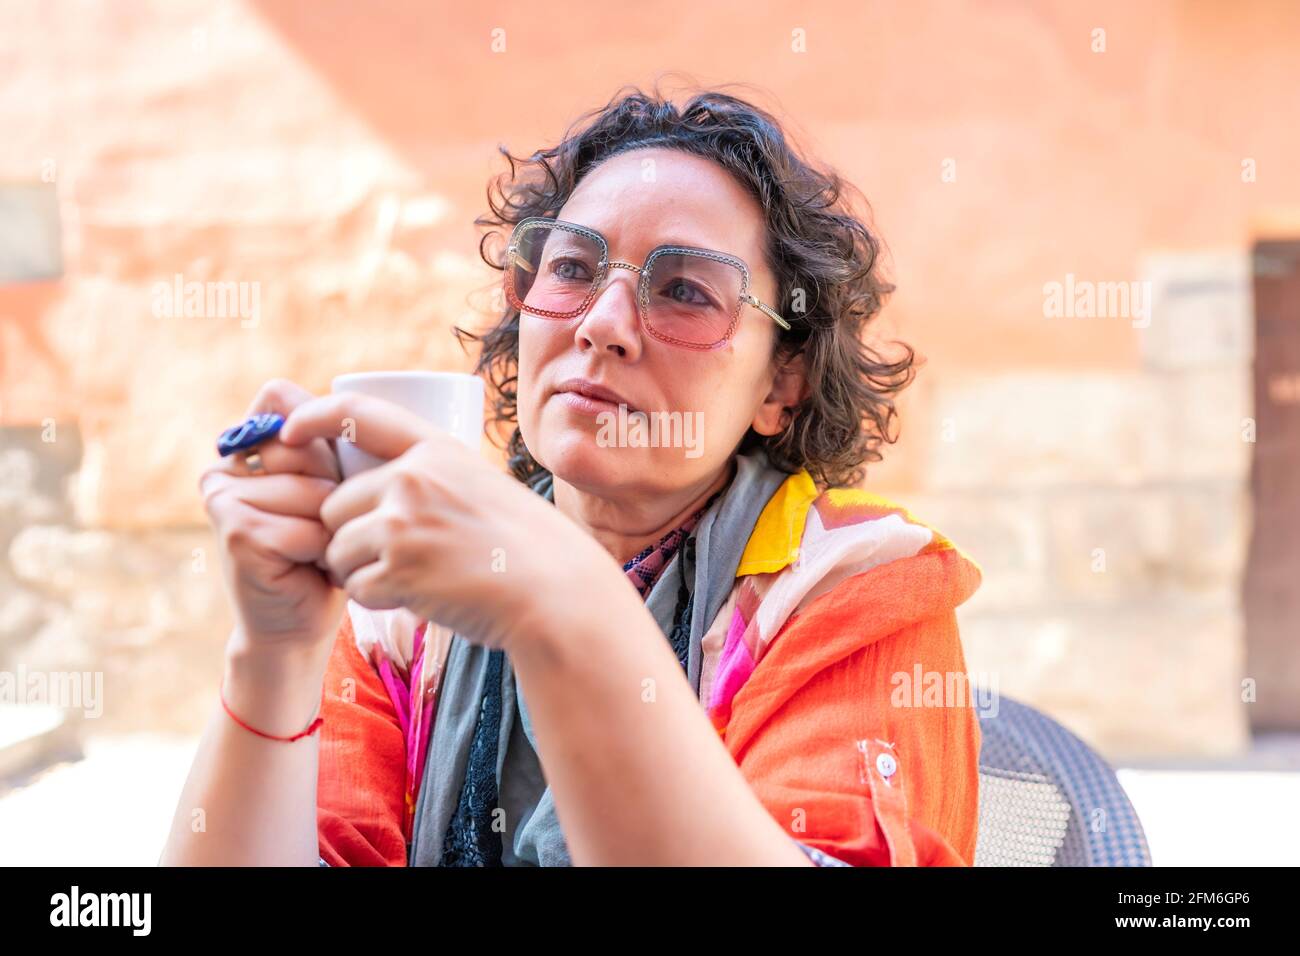 portrait of middle-aged woman having a cup of coffee Stock Photo